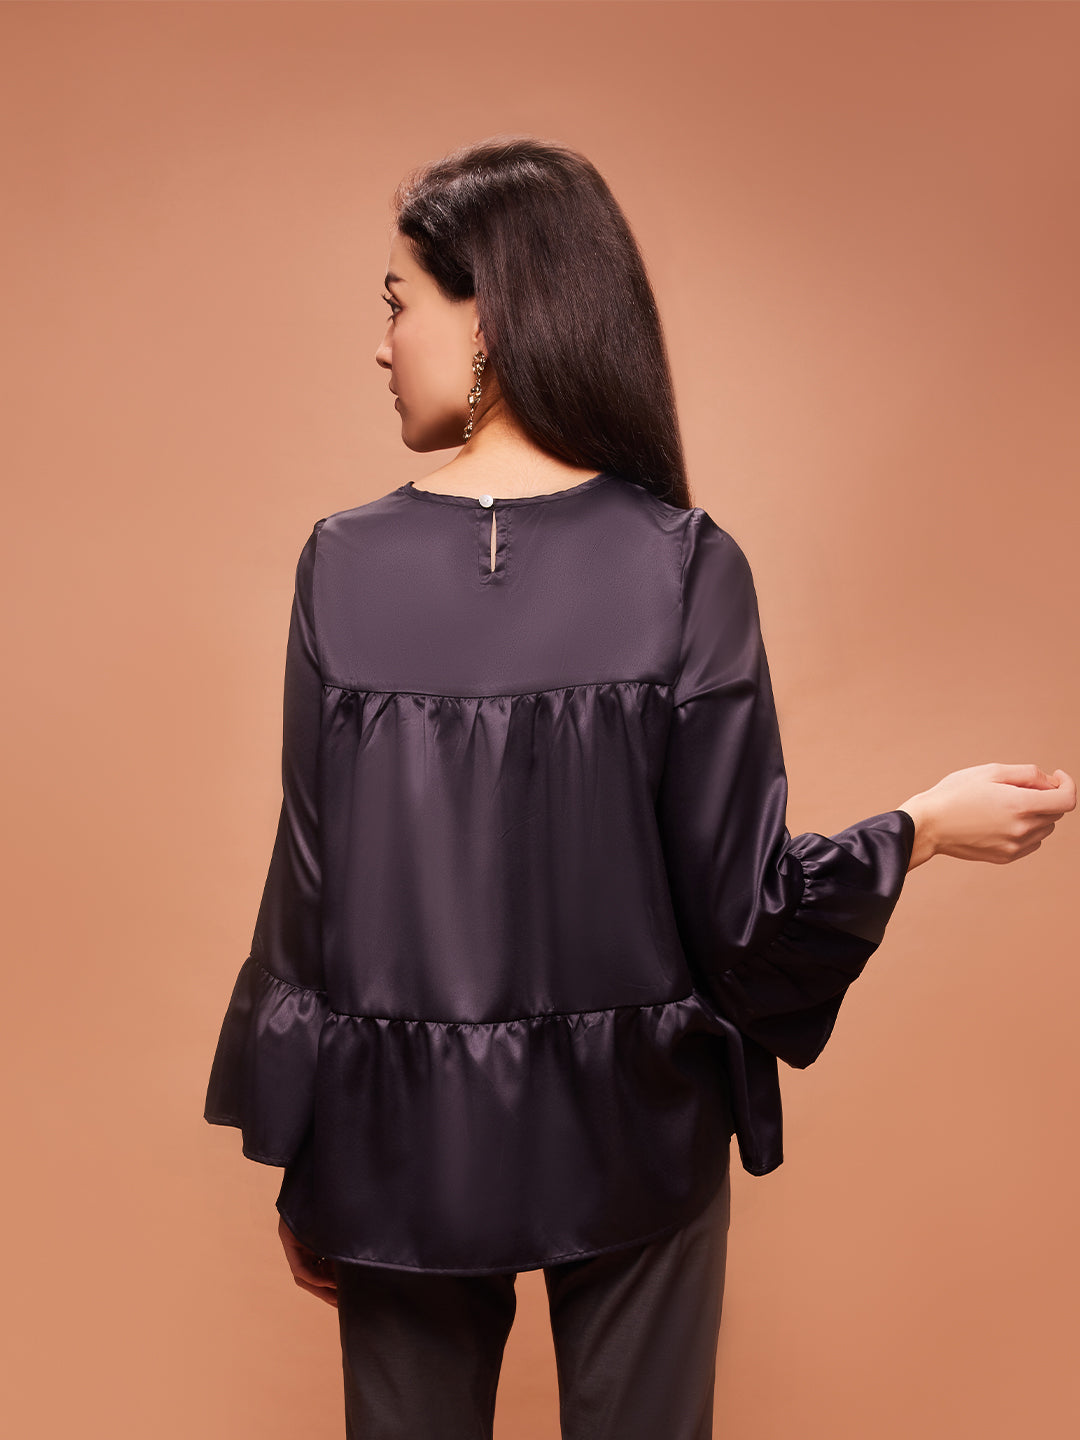 Bombay High Women's Dark Charcoal Round Neck Bell Sleeves Tiered Top